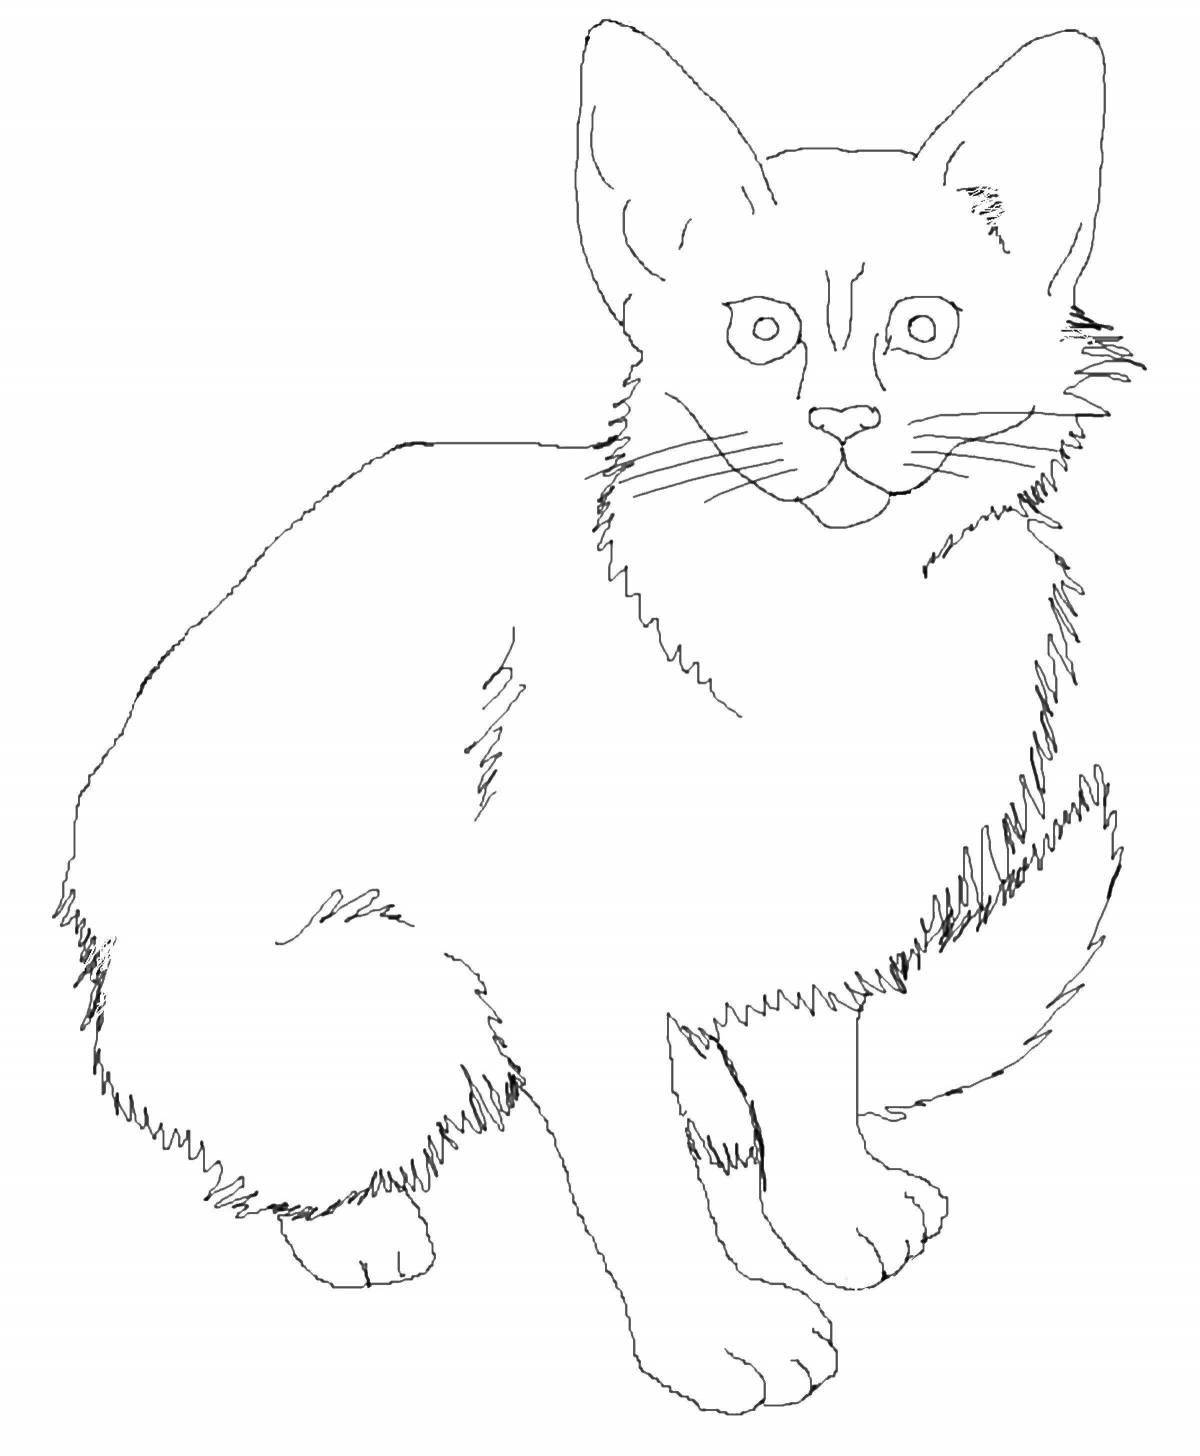 Adorable real cat coloring page